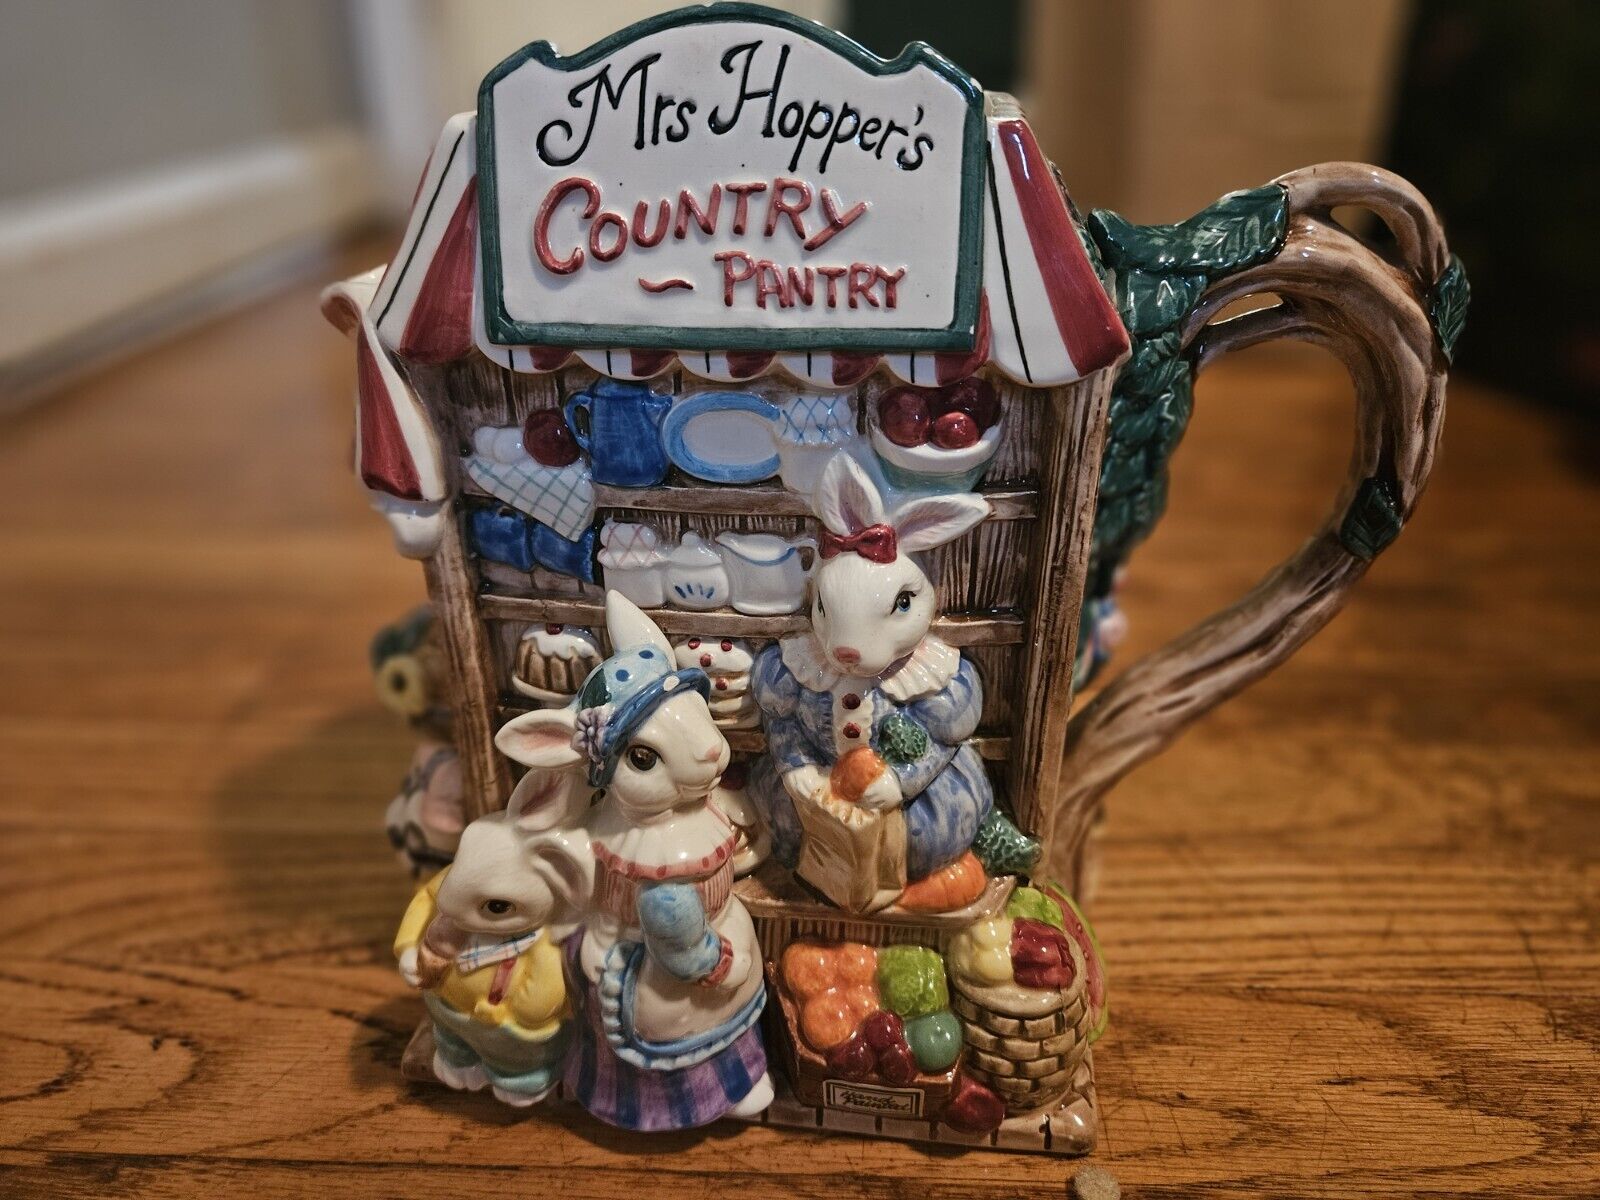 Fitz and Floyd Old MacDonald's Country Fair Pitcher /Mrs Hopper’s Country Pantry